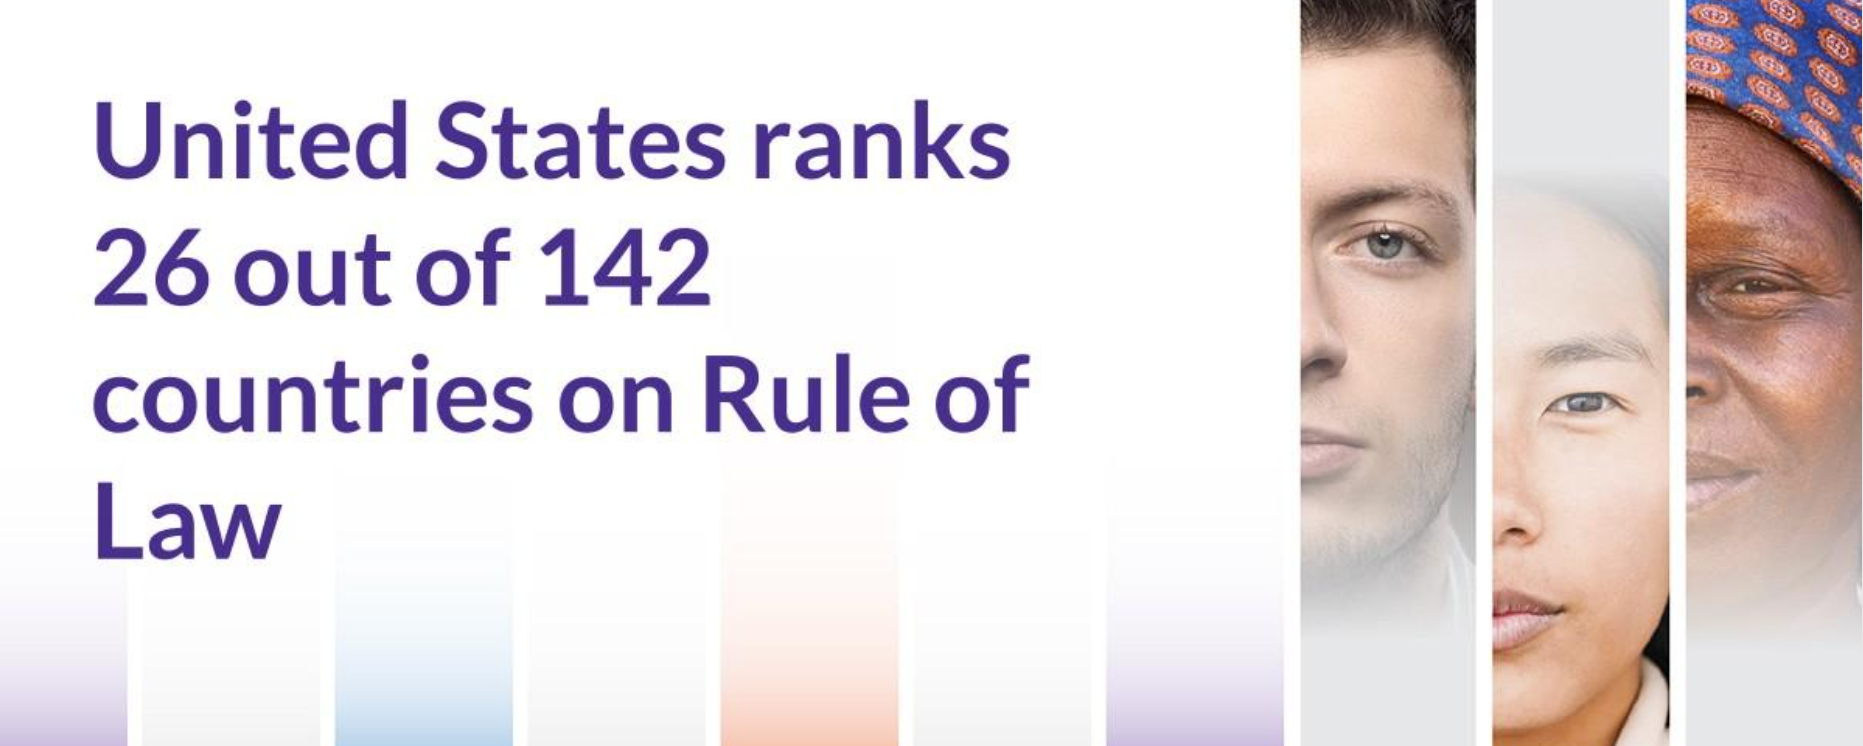 The United States ranks 26 out of 142 countries and jurisdictions in the 2023 WJP Rule of Law Index